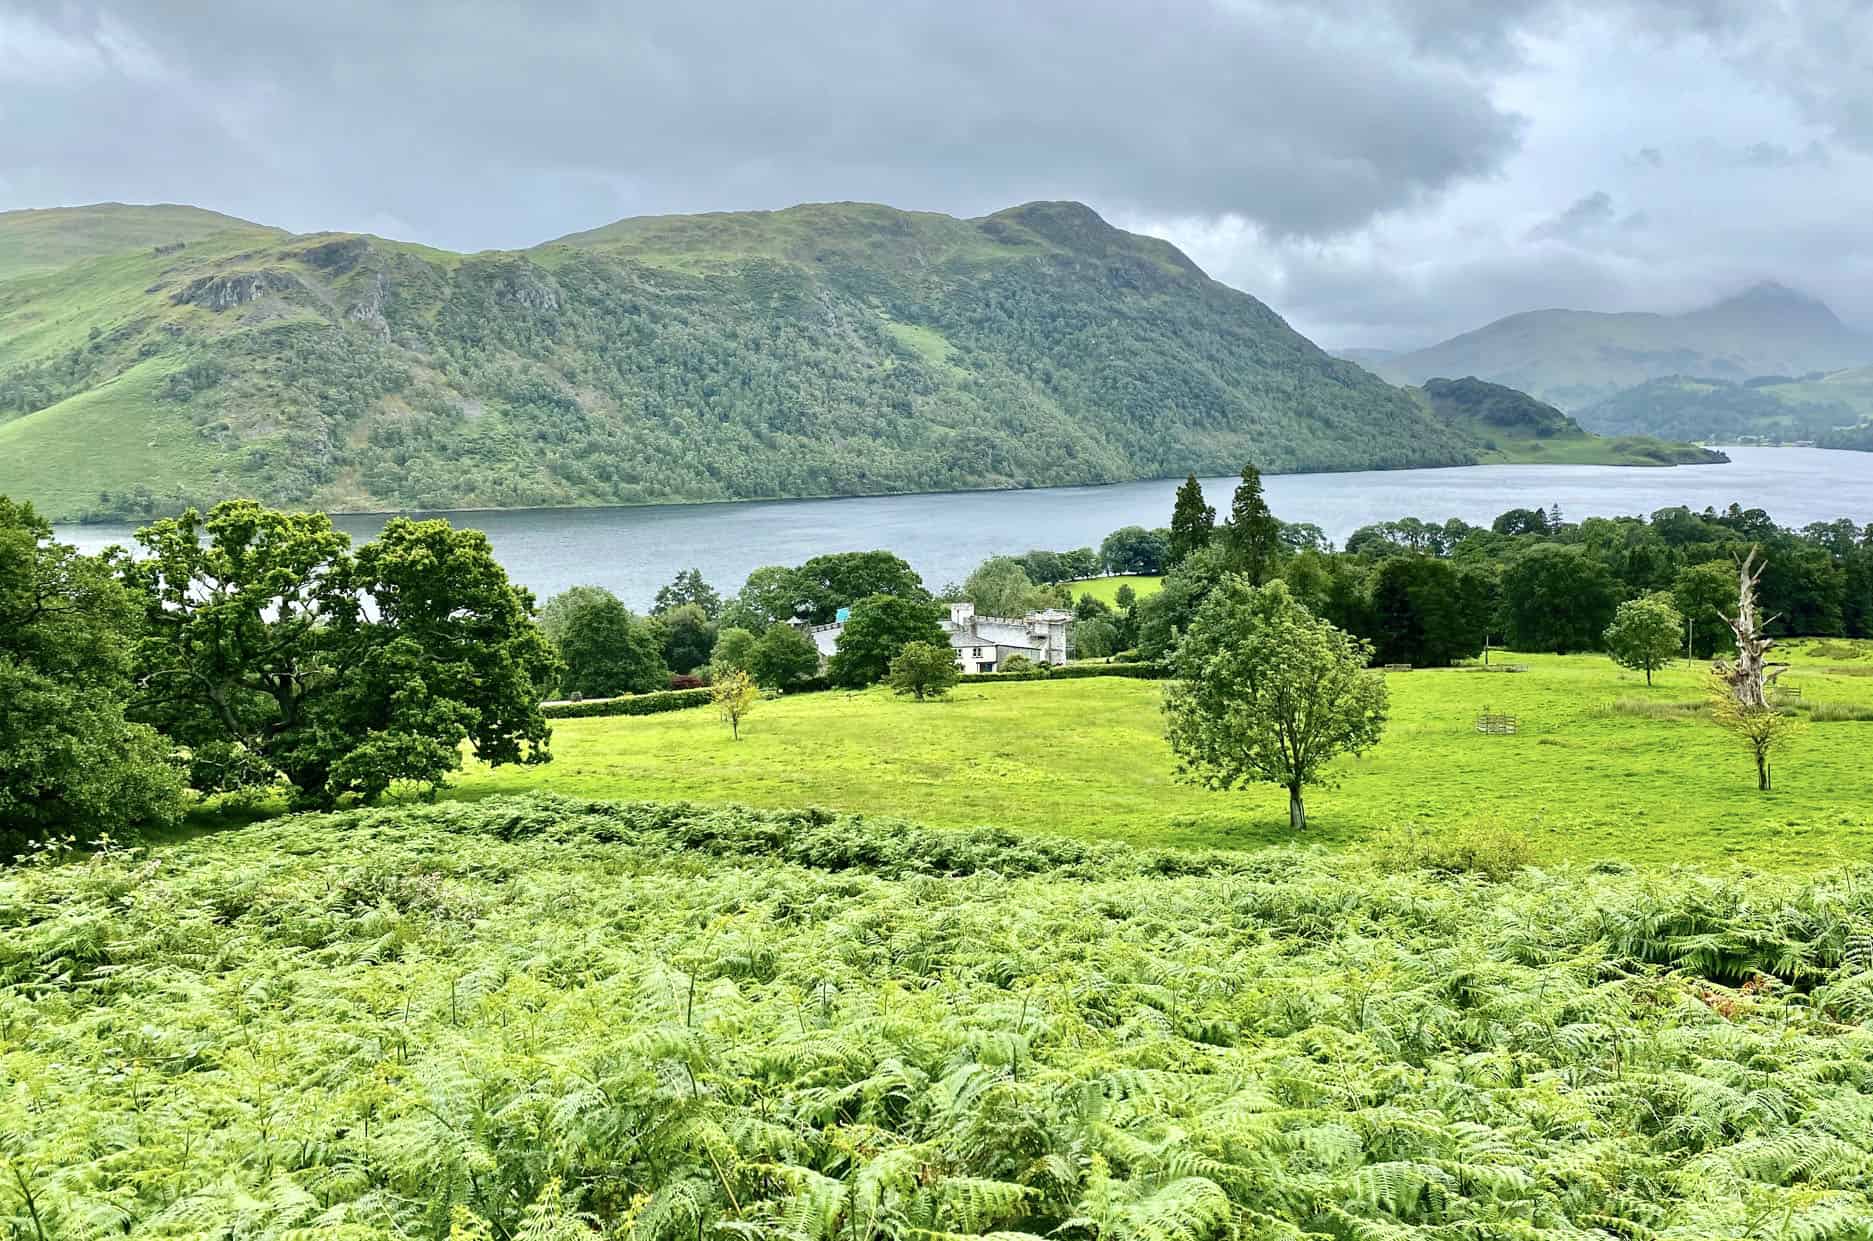 Ullswater backed by Low Birk Fell and Birk Fell. The views during this Gowbarrow Fell walk are stunning.